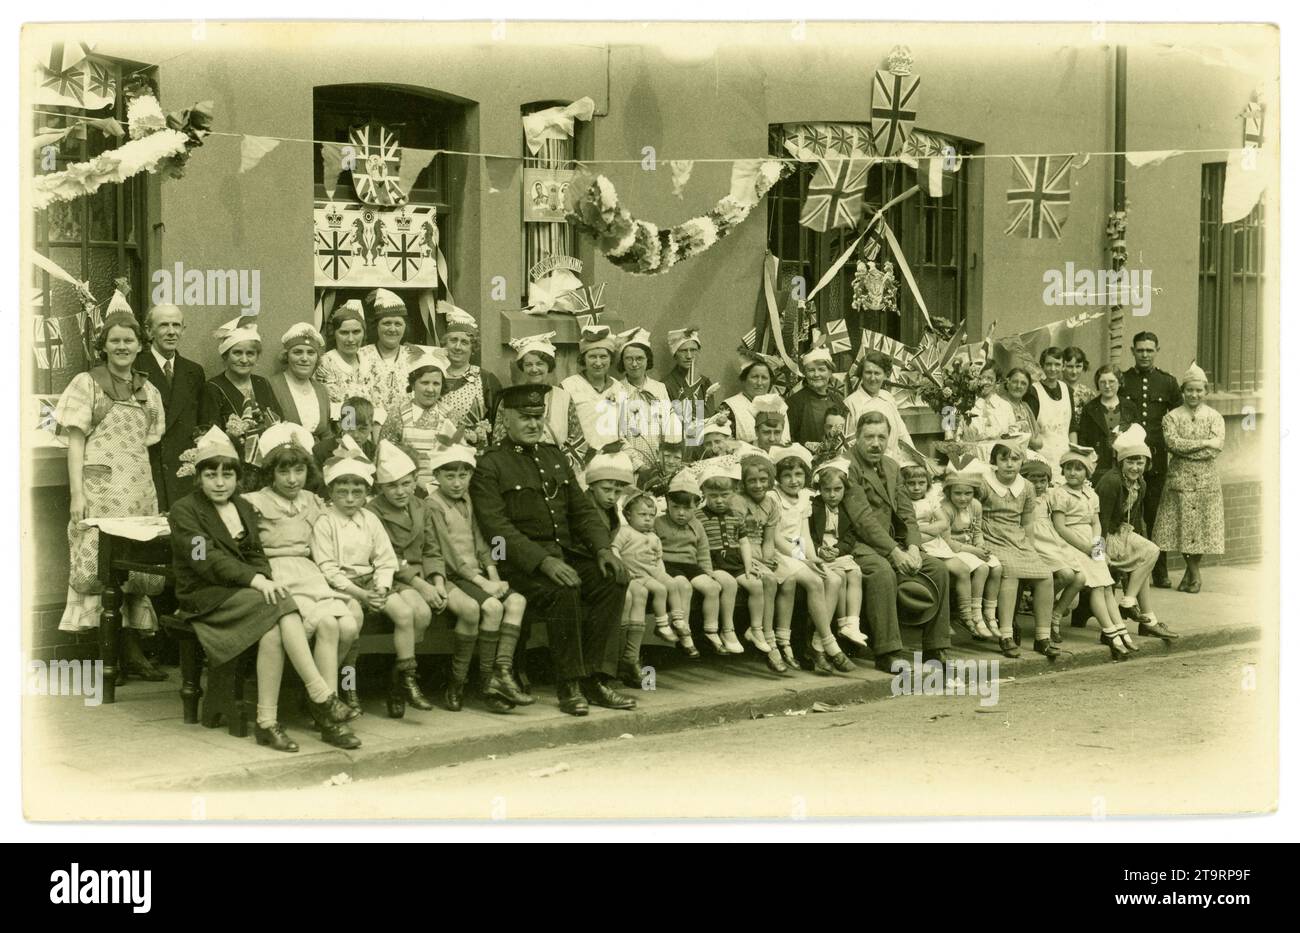 Original 1930's era postcard, charming image of smiling young children wearing party hats, posing for a photo in their street with their parents / adults, before a celebratory tea party, to celebrate the Coronation of George V1 (late Queen Elizabeth's father) Lots of bunting, flags, banners and party hats and characters. Fashions of the time. Two South Wales policemen attending to make sure they all don't get too excited. Eleanor Street, Tonypandy, Rhondda, south Wales, U.K. 1937. Stock Photo